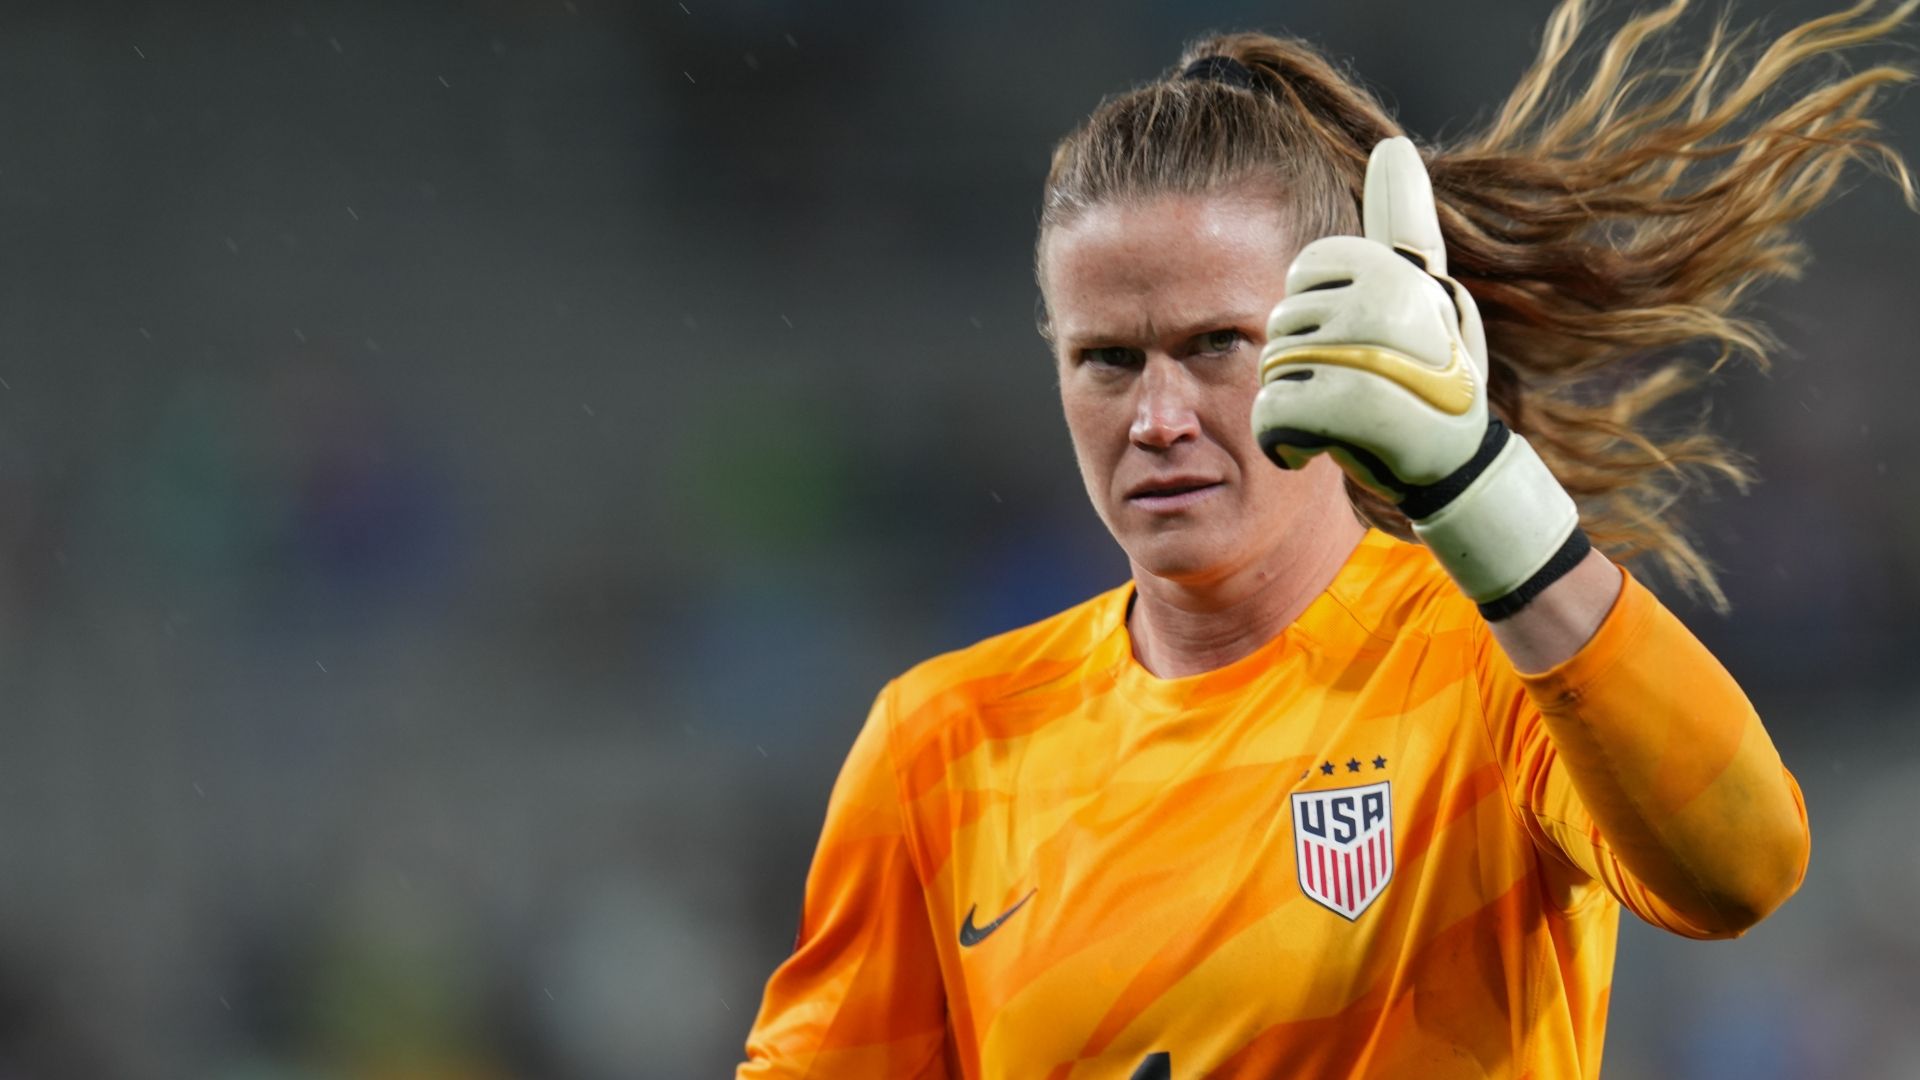 Naeher's Heroics: USWNT Goalkeeper Ready to Face Brazil in Semifinal Showdown